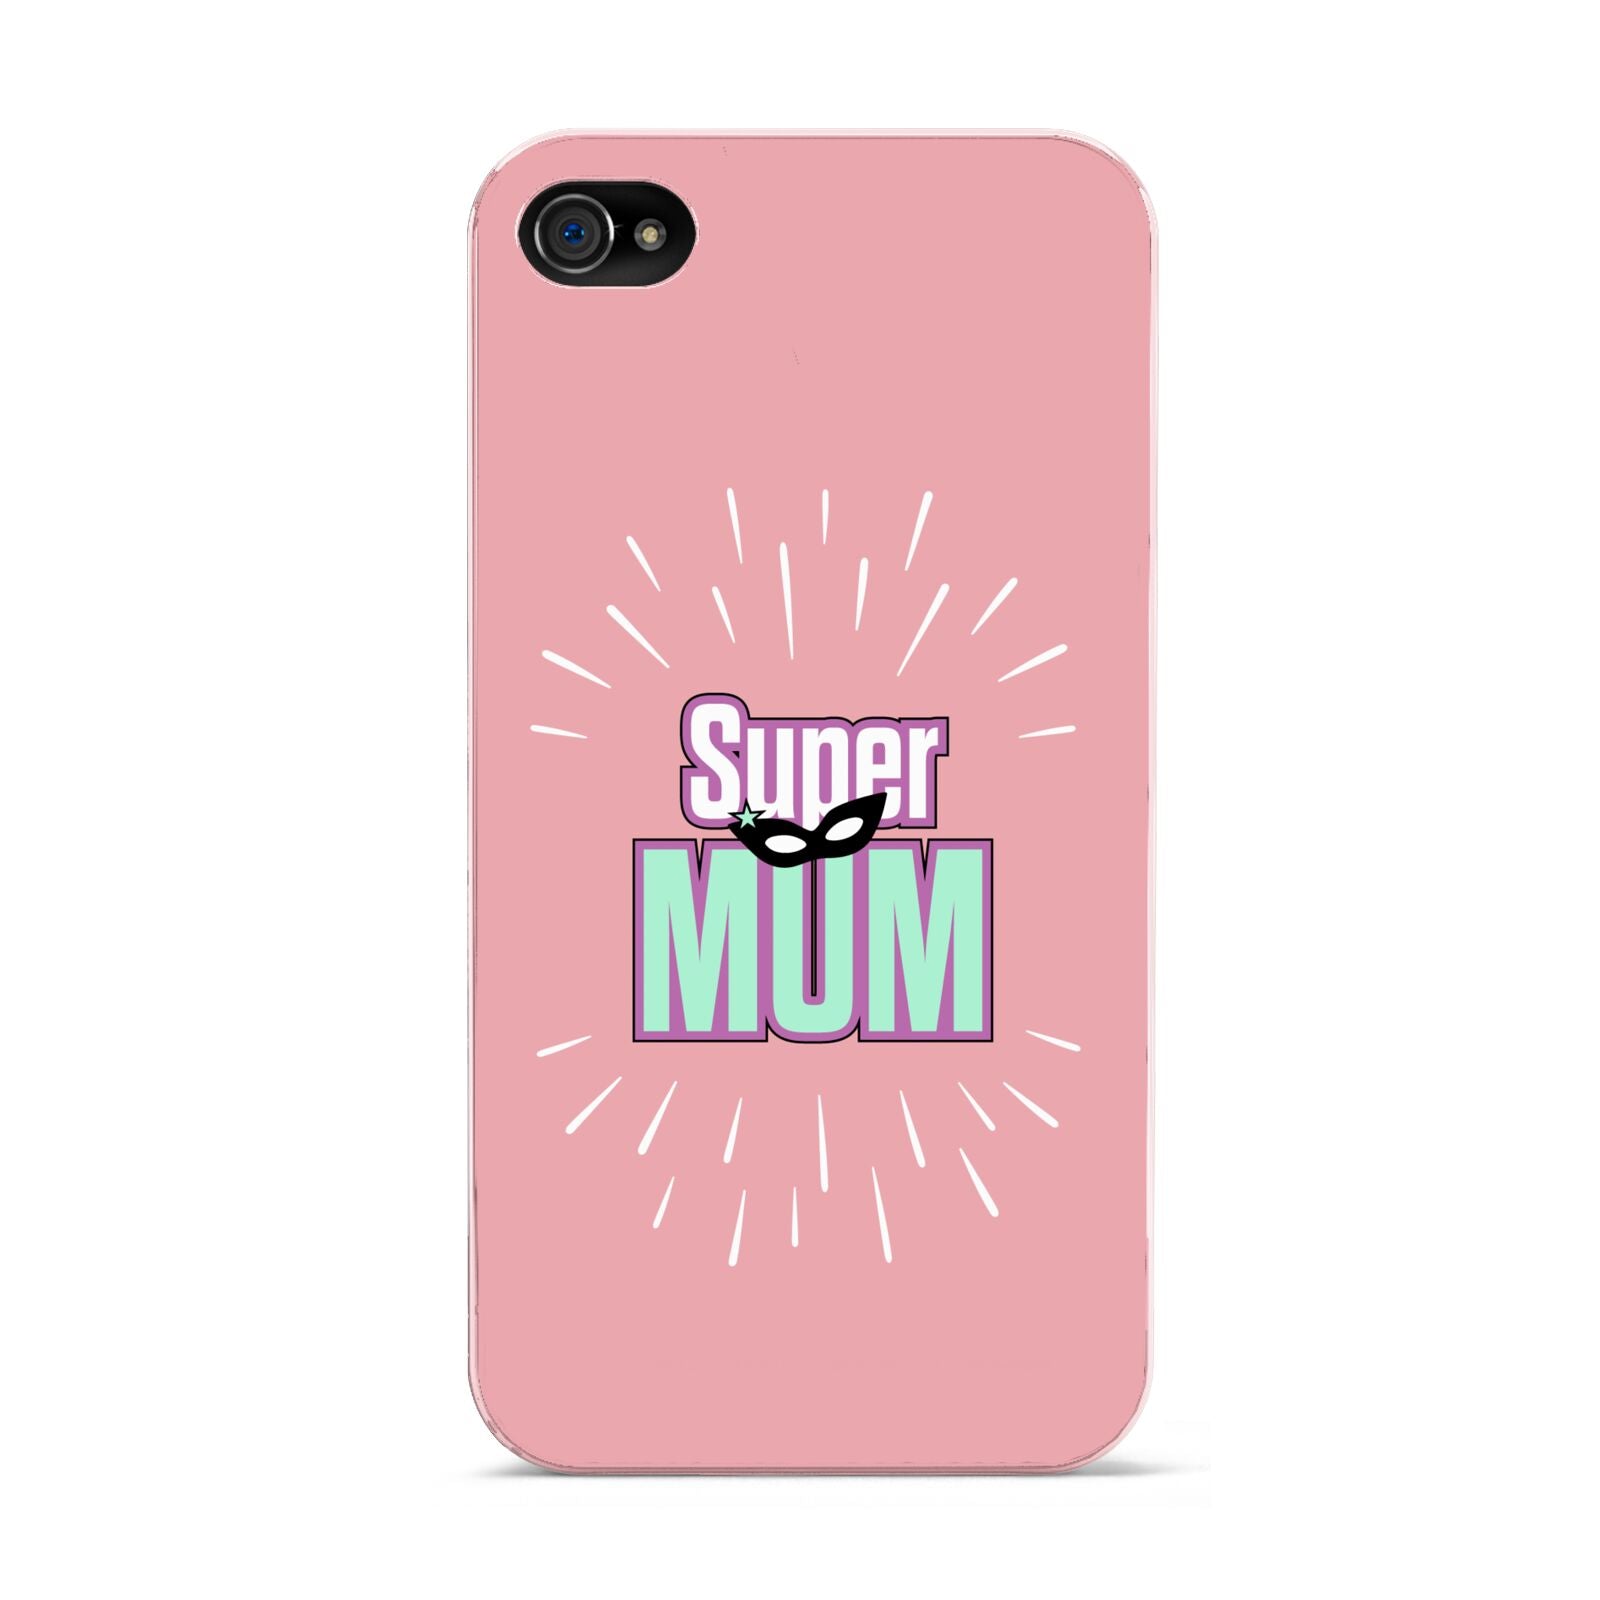 Super Mum Mothers Day Apple iPhone 4s Case